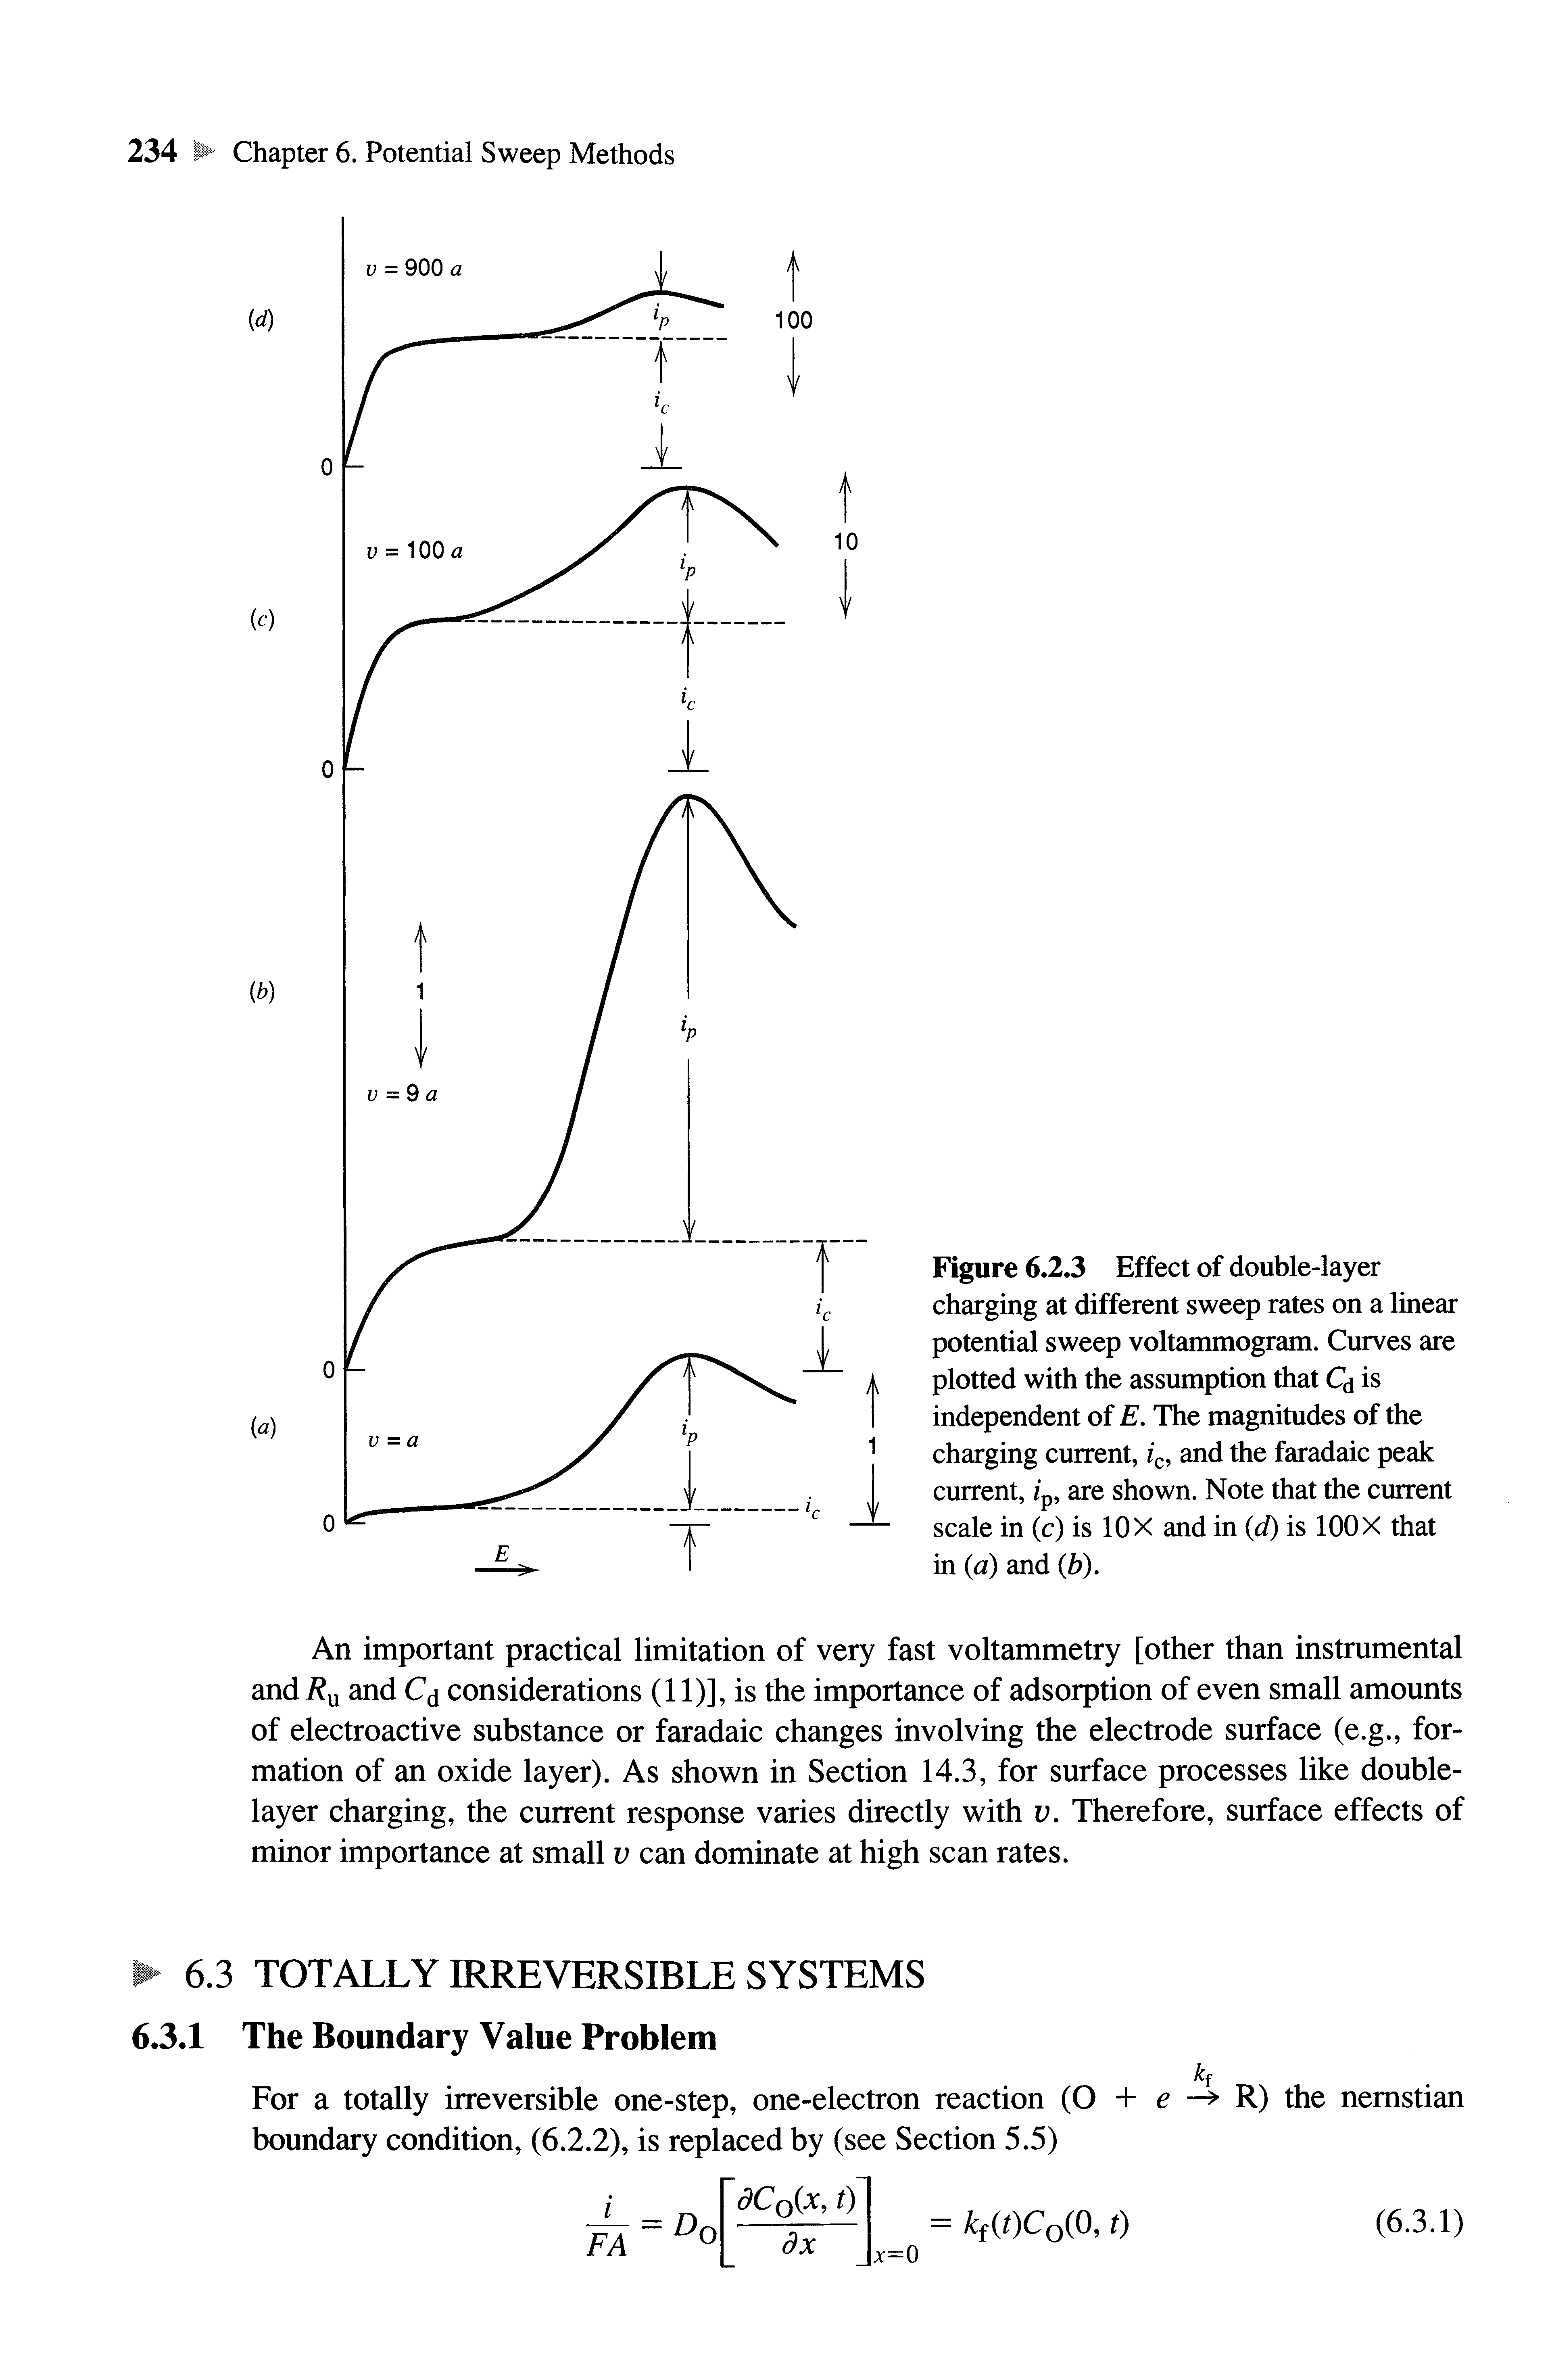 Figure 6.2.3 Effect of double-layer charging at different sweep rates on a linear potential sweep voltammogram. Curves are plotted with the assumption that Cd is independent of E. The magnitudes of the charging current, ic, and the faradaic peak current, /p, are shown. Note that the current scale in (c) is lOX and in (d) is lOOX that in (a) and (b).